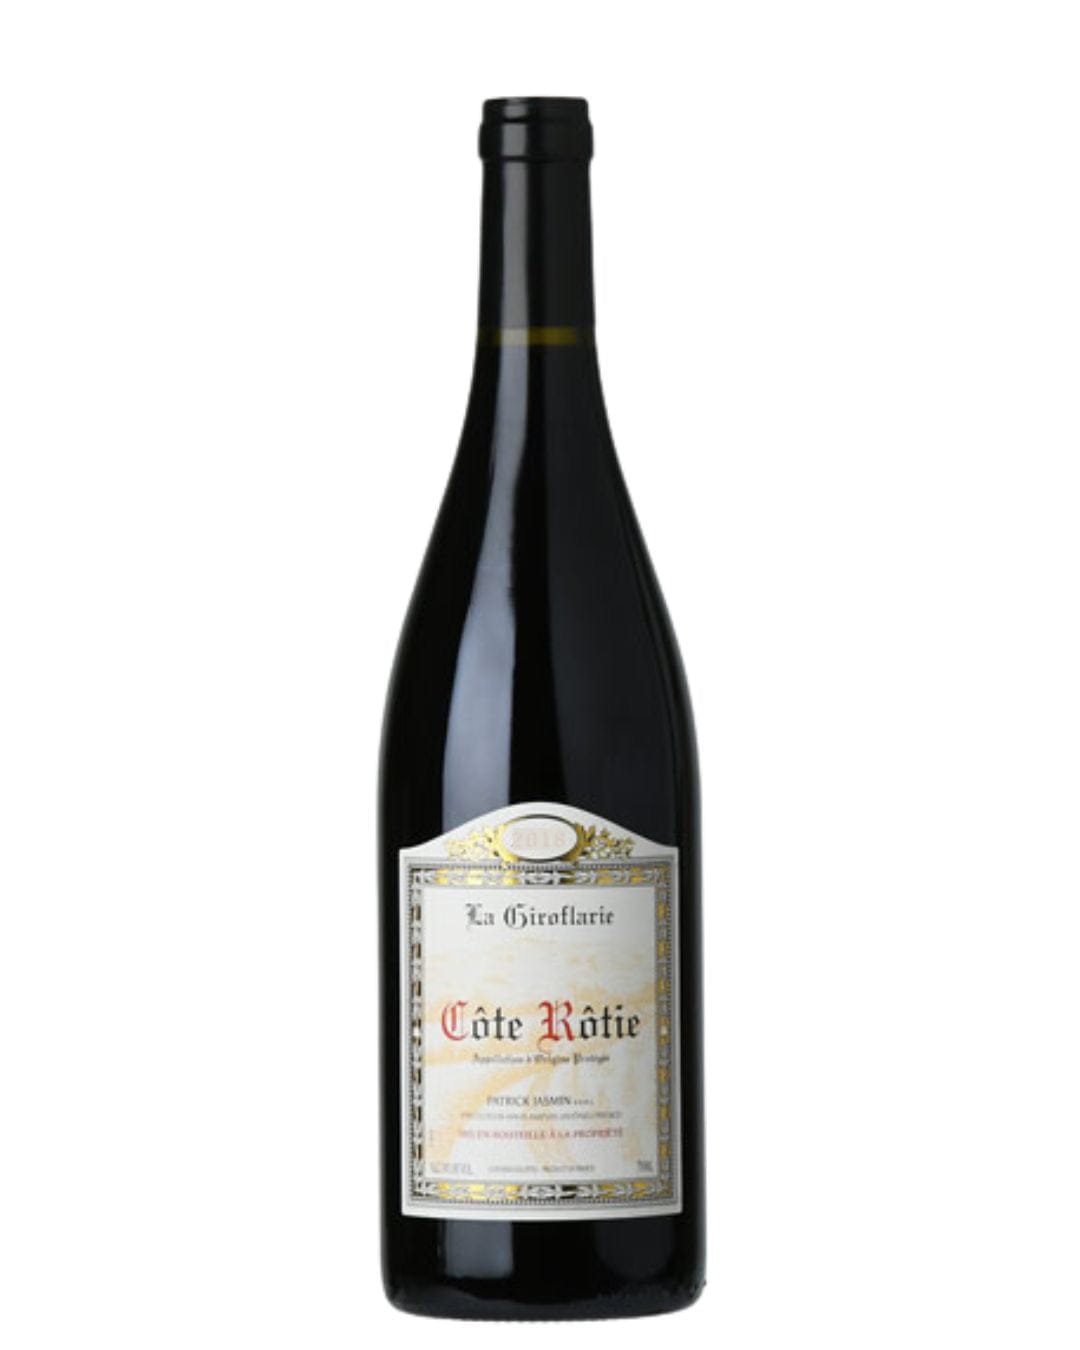 Shop Domaine Jasmin Domaine Jasmin Cote-Rotie La Giroflarie Rouge 2017 online at PENTICTON artisanal French wine store in Hong Kong. Discover other French wines, promotions, workshops and featured offers at pentictonpacific.com 